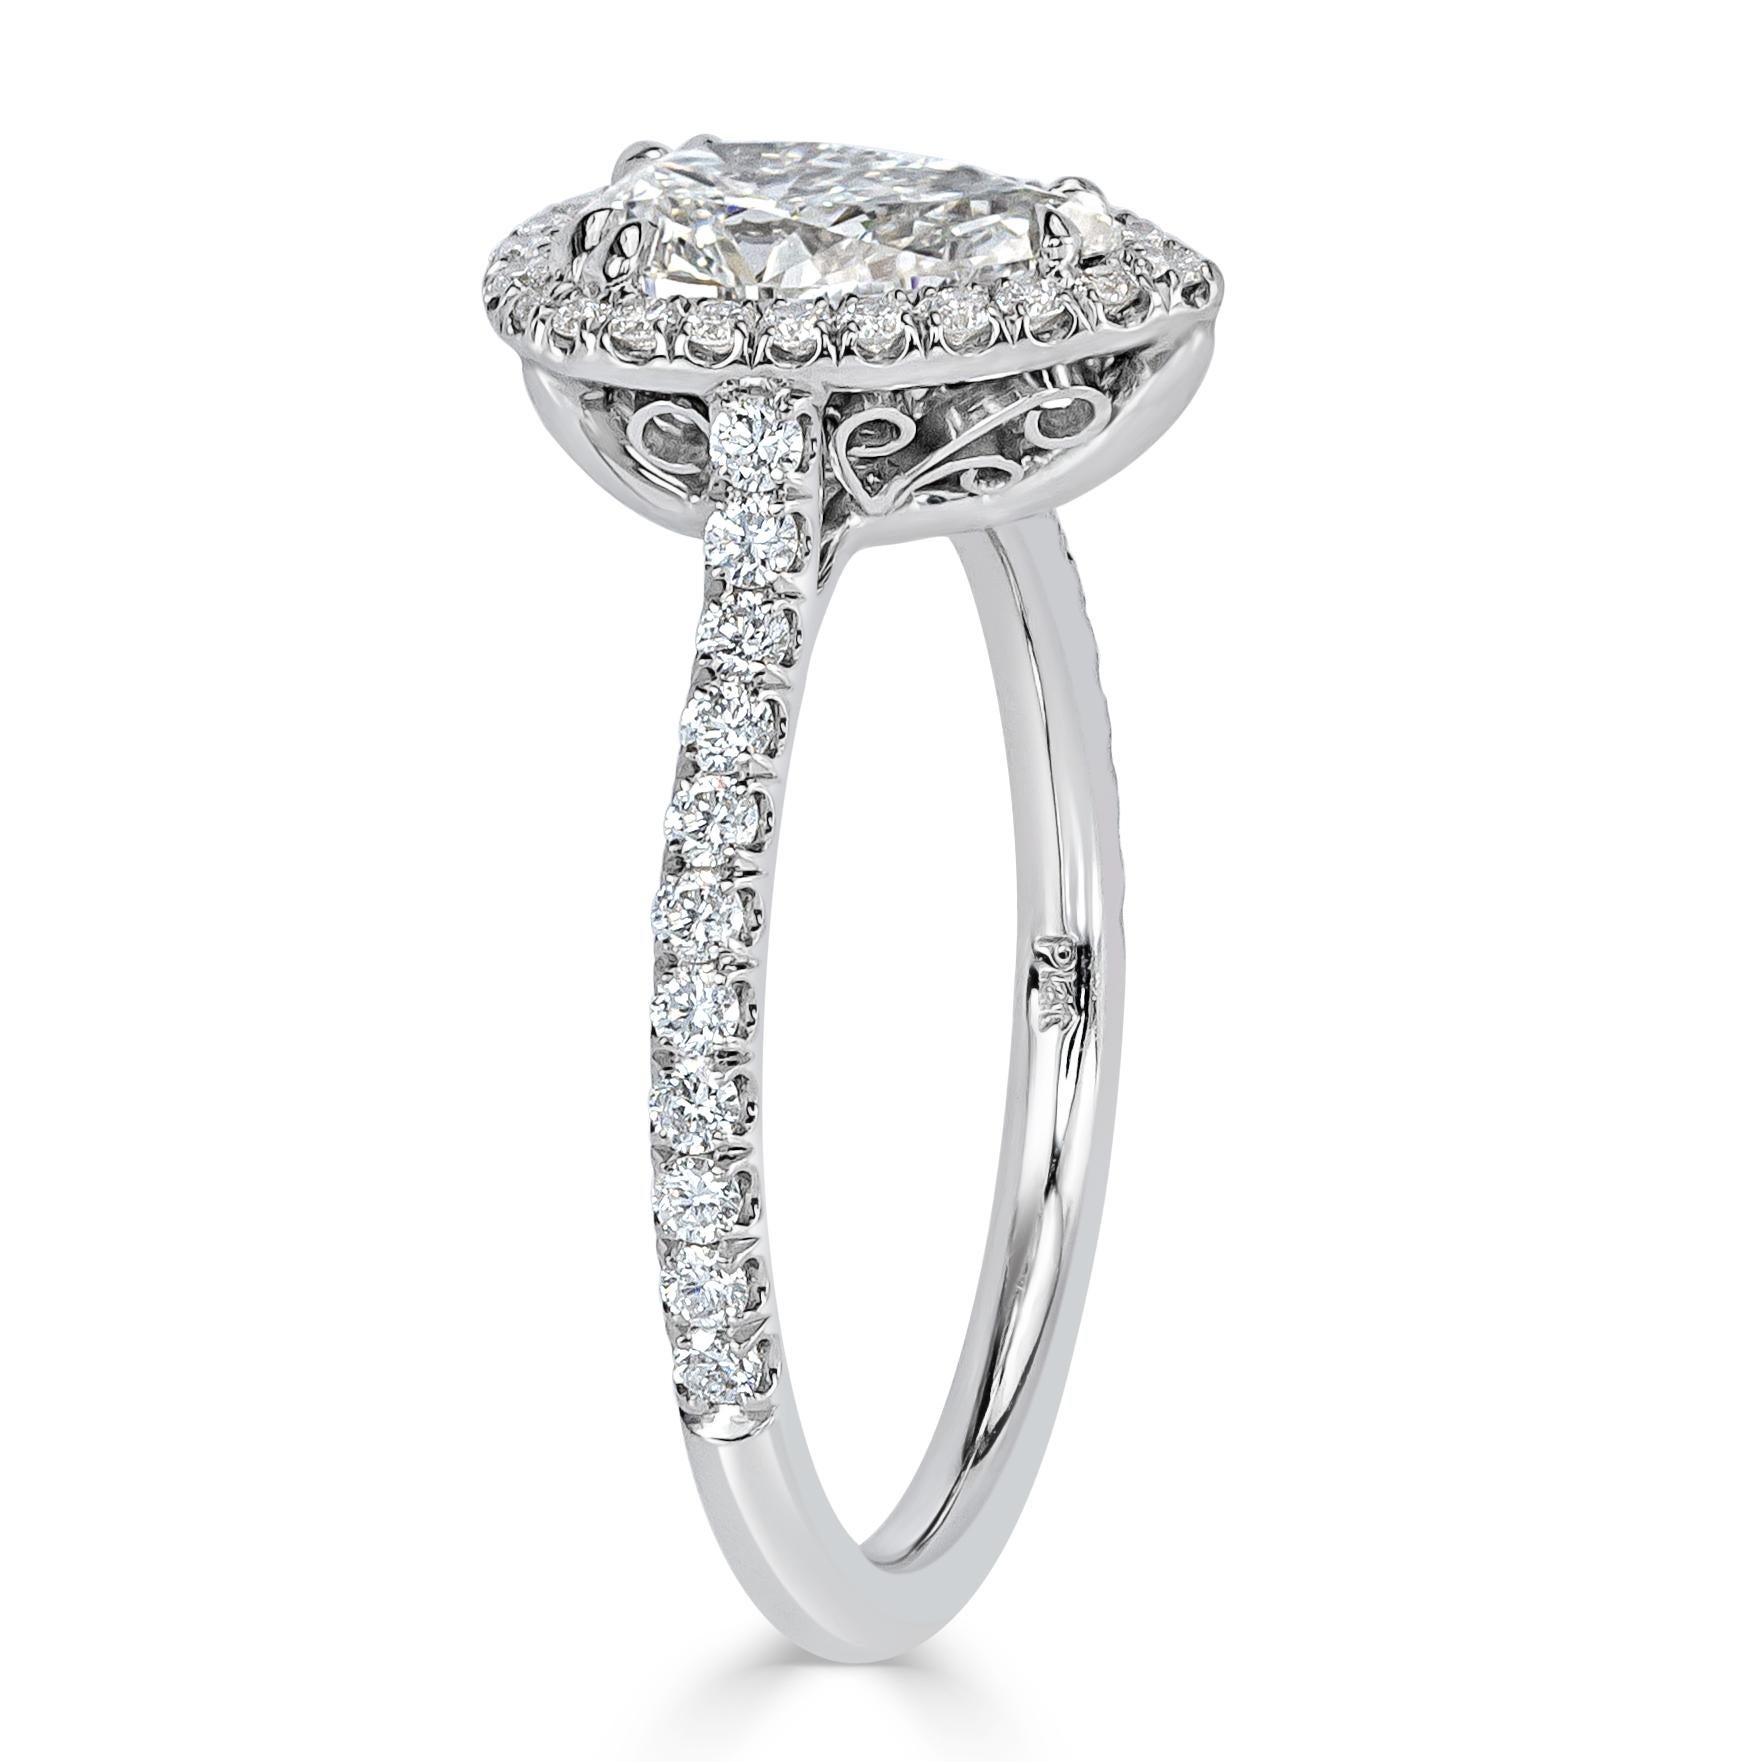 Created in platinum, this ravishing diamond engagement ring showcases an exquisite 1.03ct pear shaped center diamond, GIA certified at F-VS2. It is accented by a halo of round brilliant cut diamonds as well as one row of shimmering diamonds micro